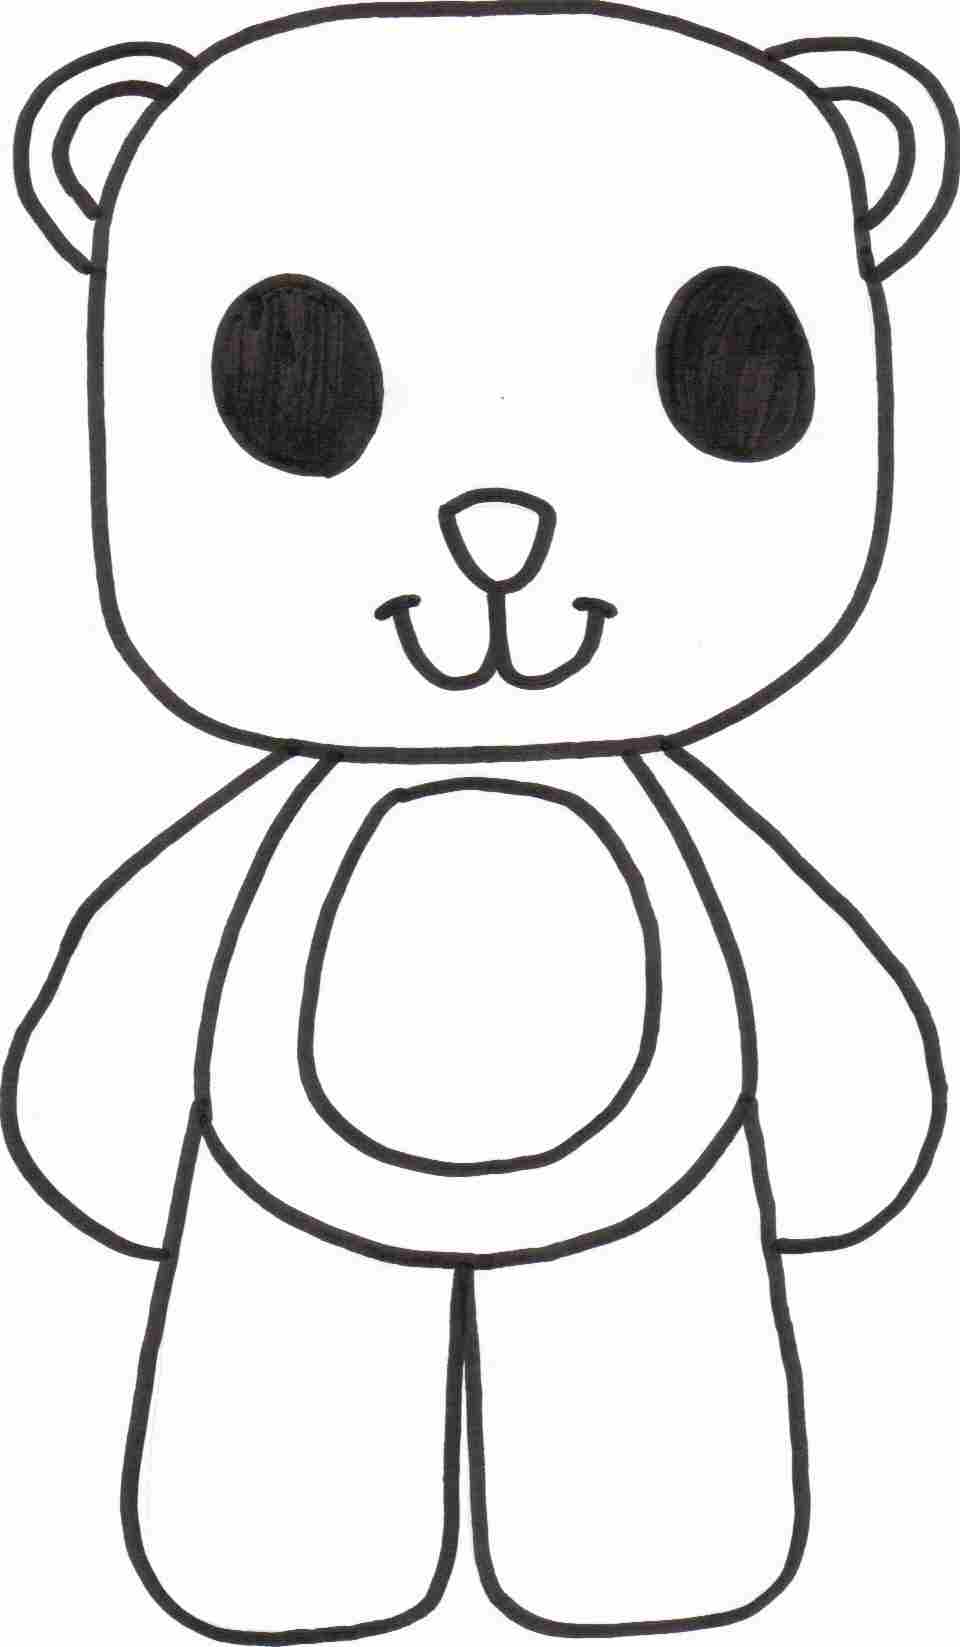 TEDDY BEAR COLORING SHEETS Â« ONLINE COLORING